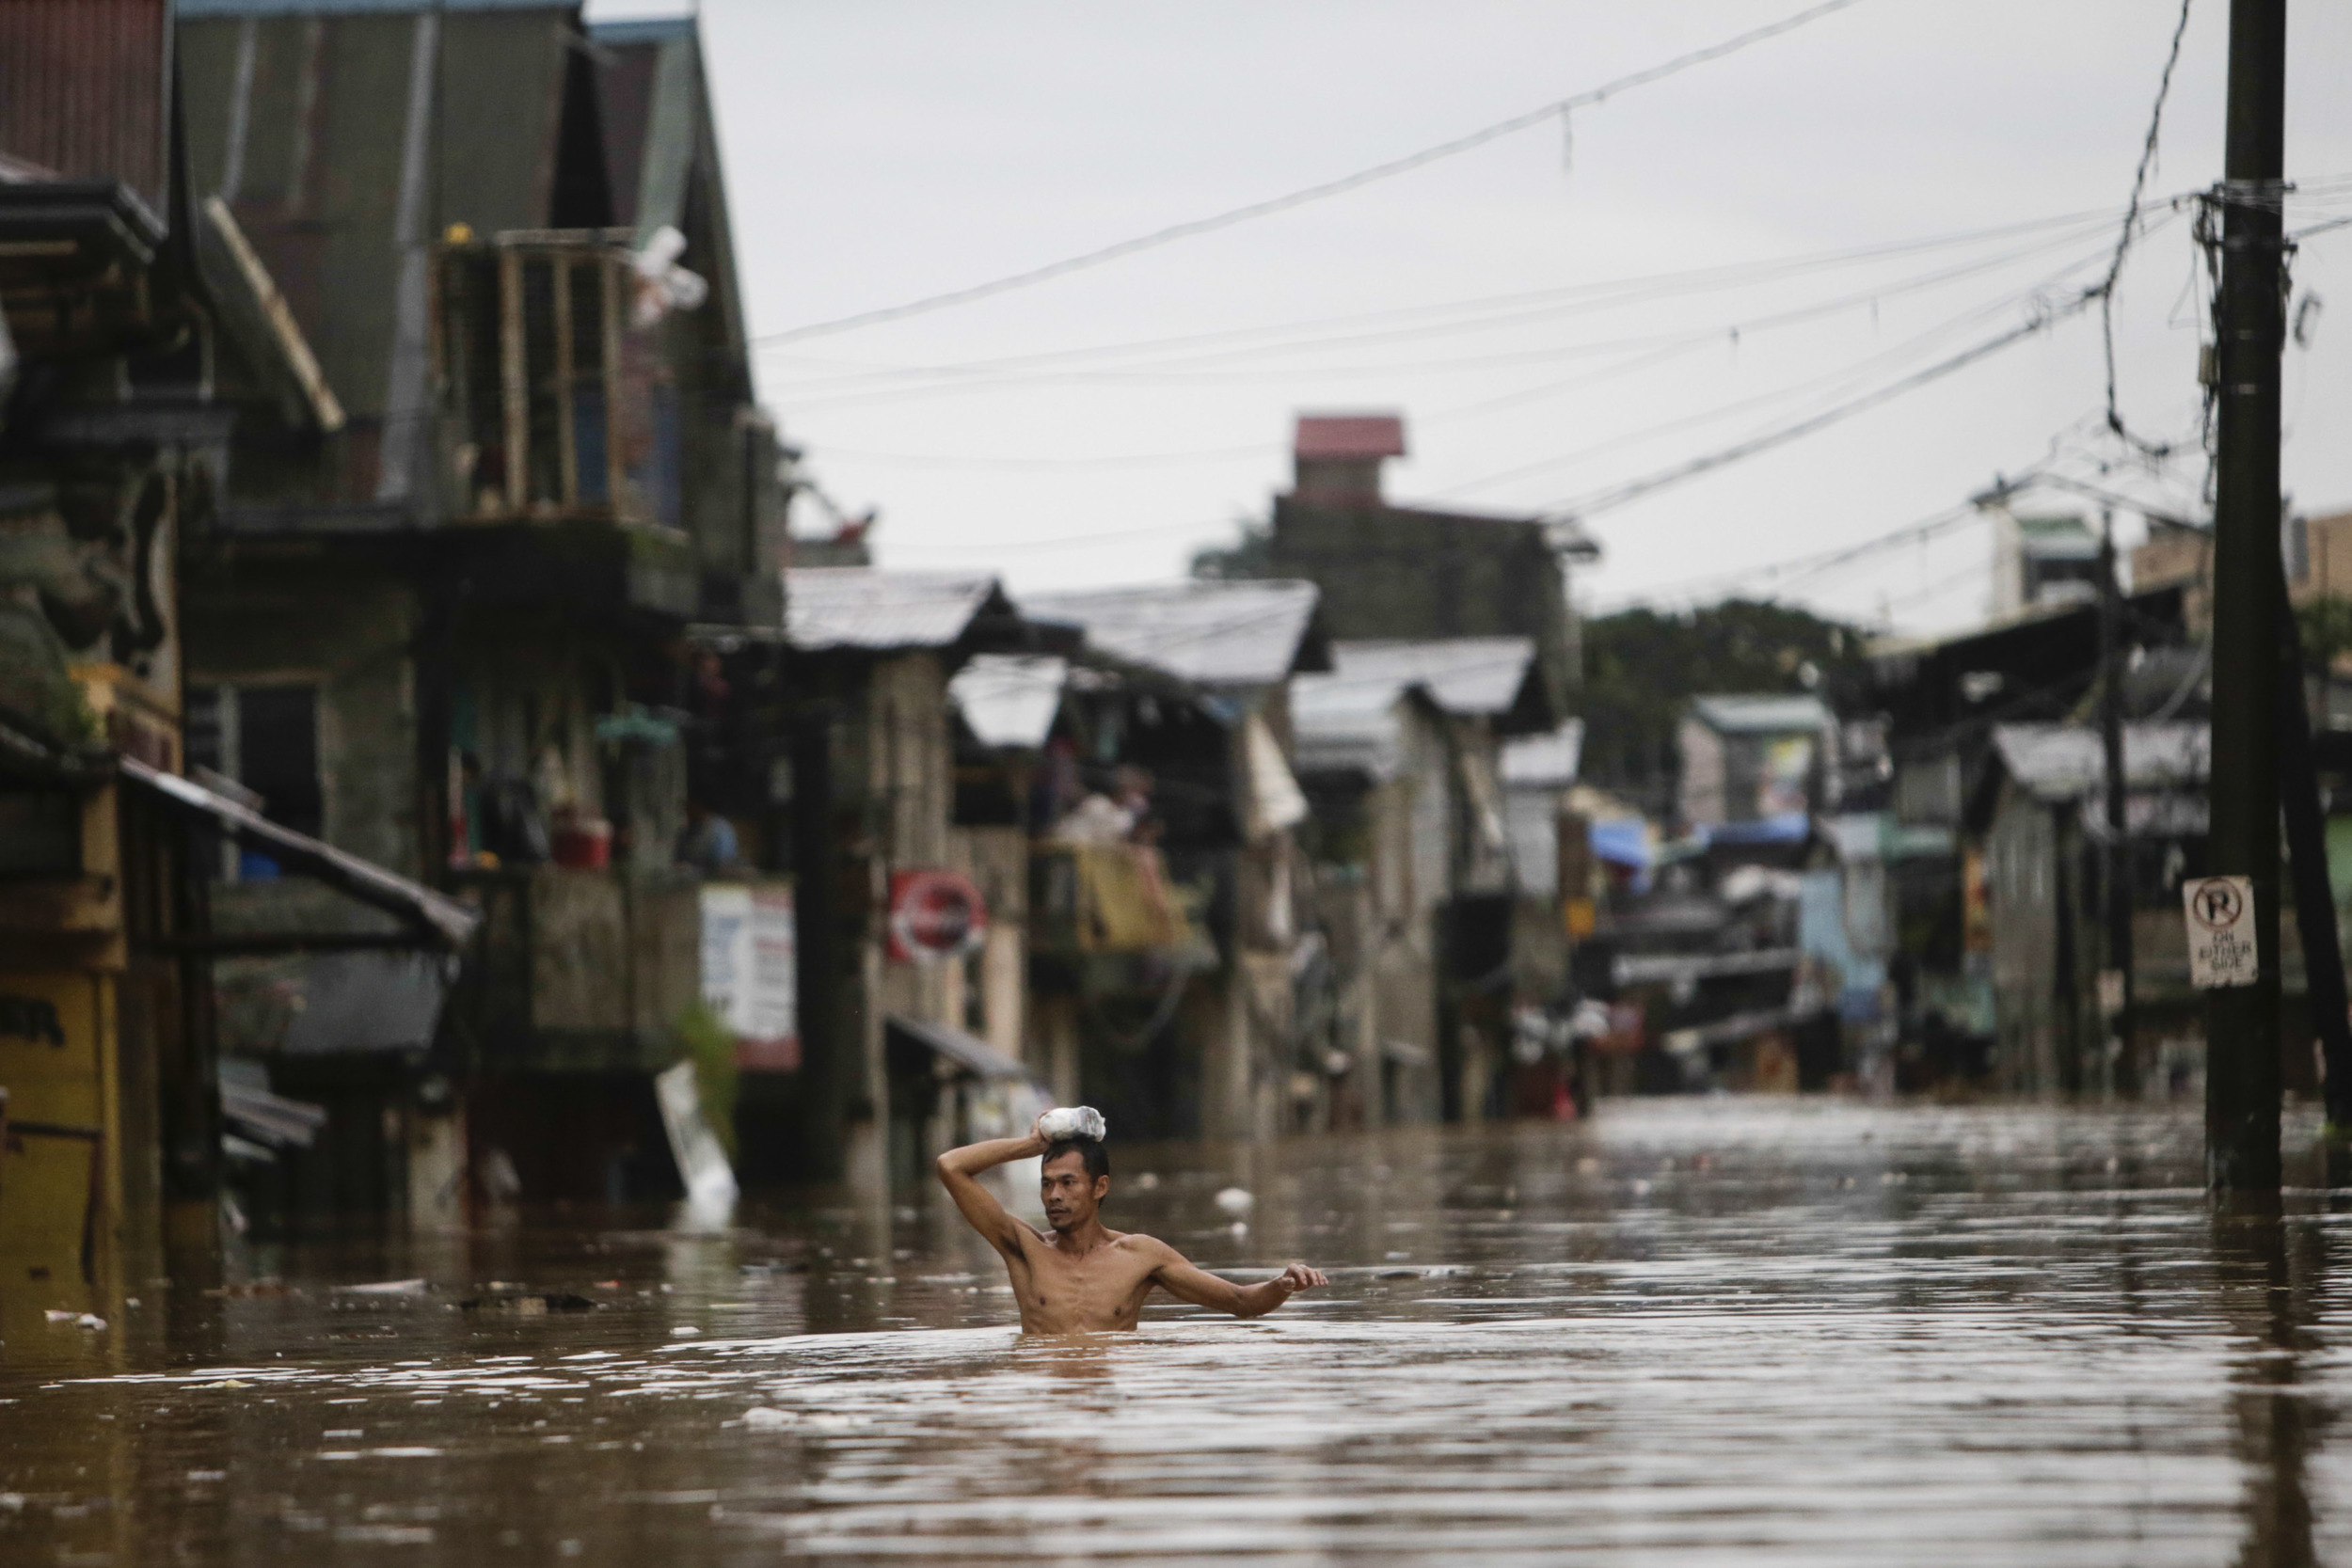  A man wades through floodwaters in Tumana, Rizal Province August 20, 2013. Monsoon rains reinforced by a tropical storm flooded half the Philippine capital in just 24 hours, triggering landslides and killing at least seven people, officials said on 